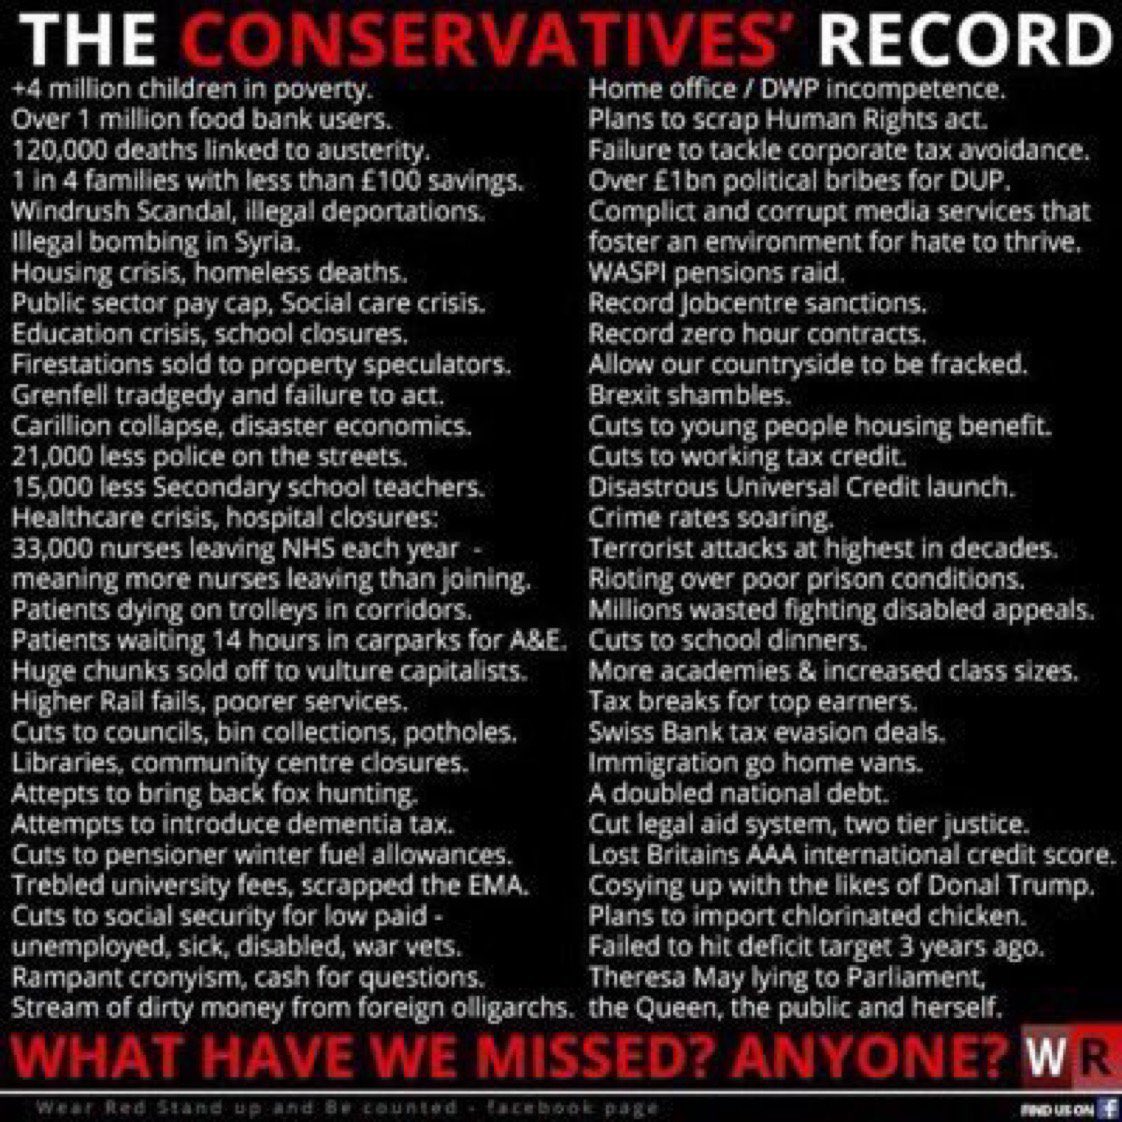 @Bbmorg Here's the list...... Tories are utterly EVIL.....